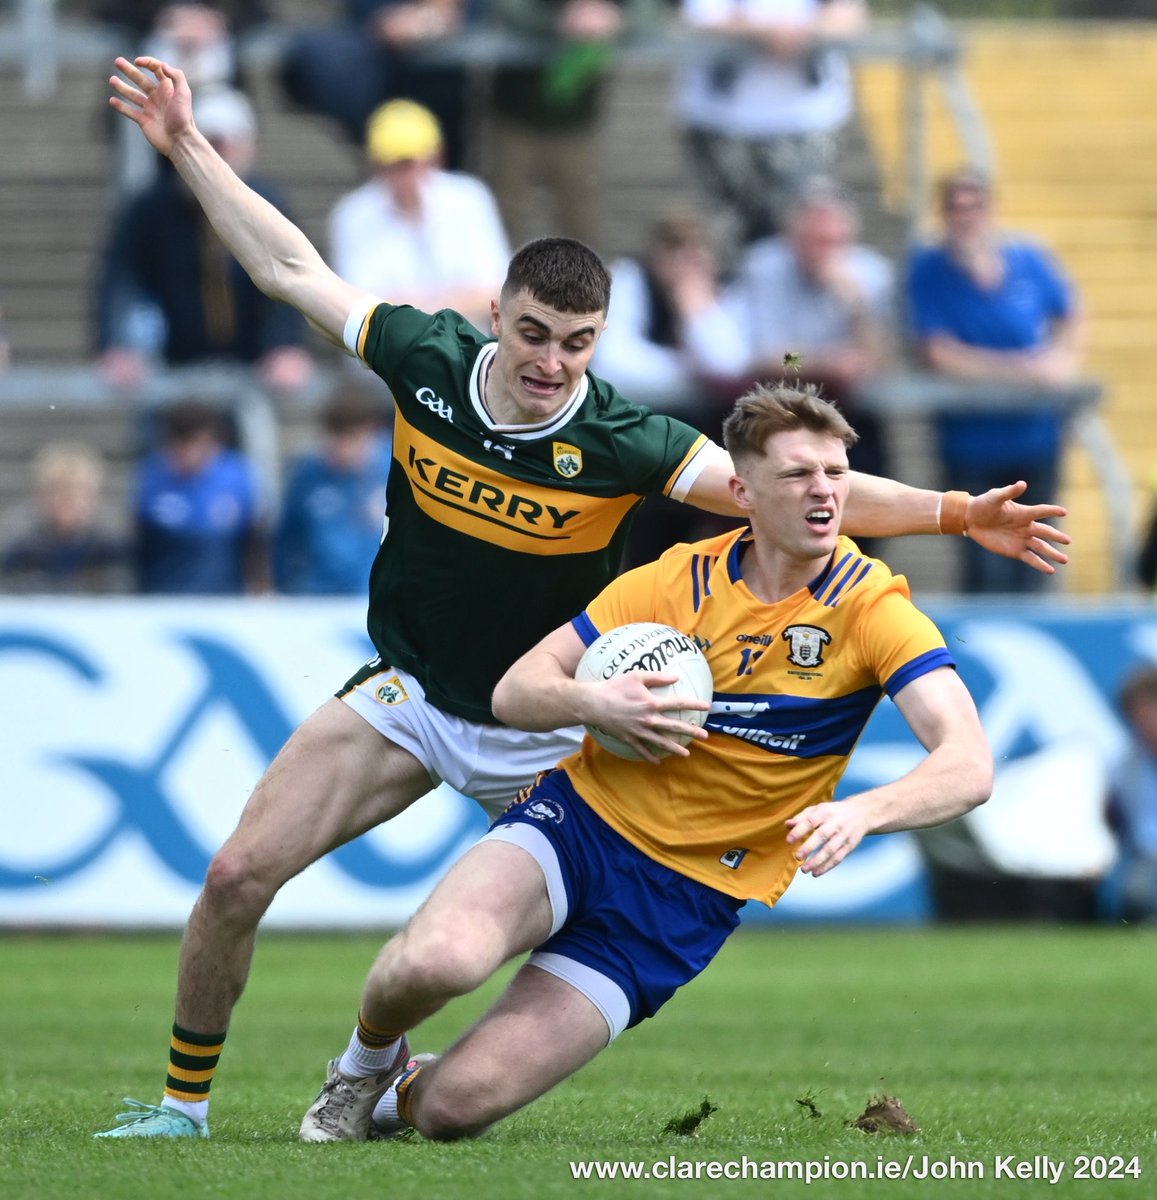 Dermot Coughlan of Clare in action against Sean O Shea of Kerry during their Munster Senior Football final at Cusack Park. Photograph by John Kelly. The score after the first quarter is @GaaClare 0-02 , @Kerry_Official 0-03 @MunsterGAA #GAA